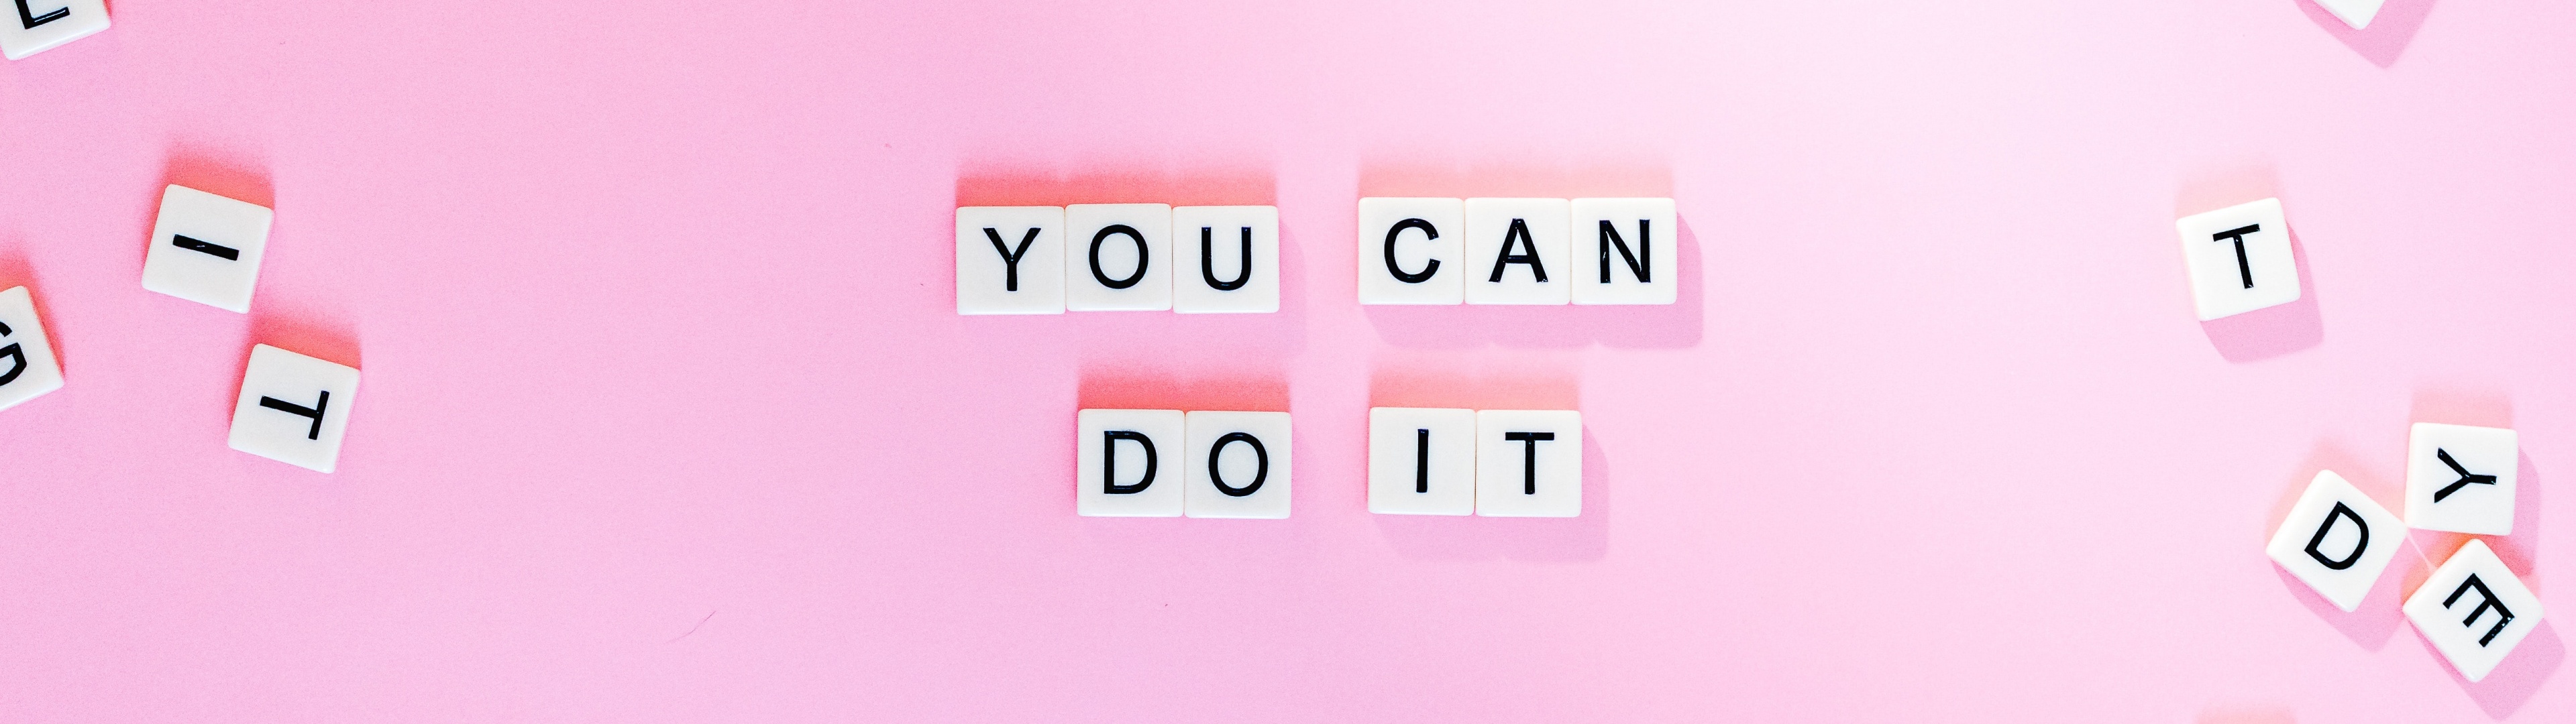 You Can Do It Wallpaper 4K, Pink background